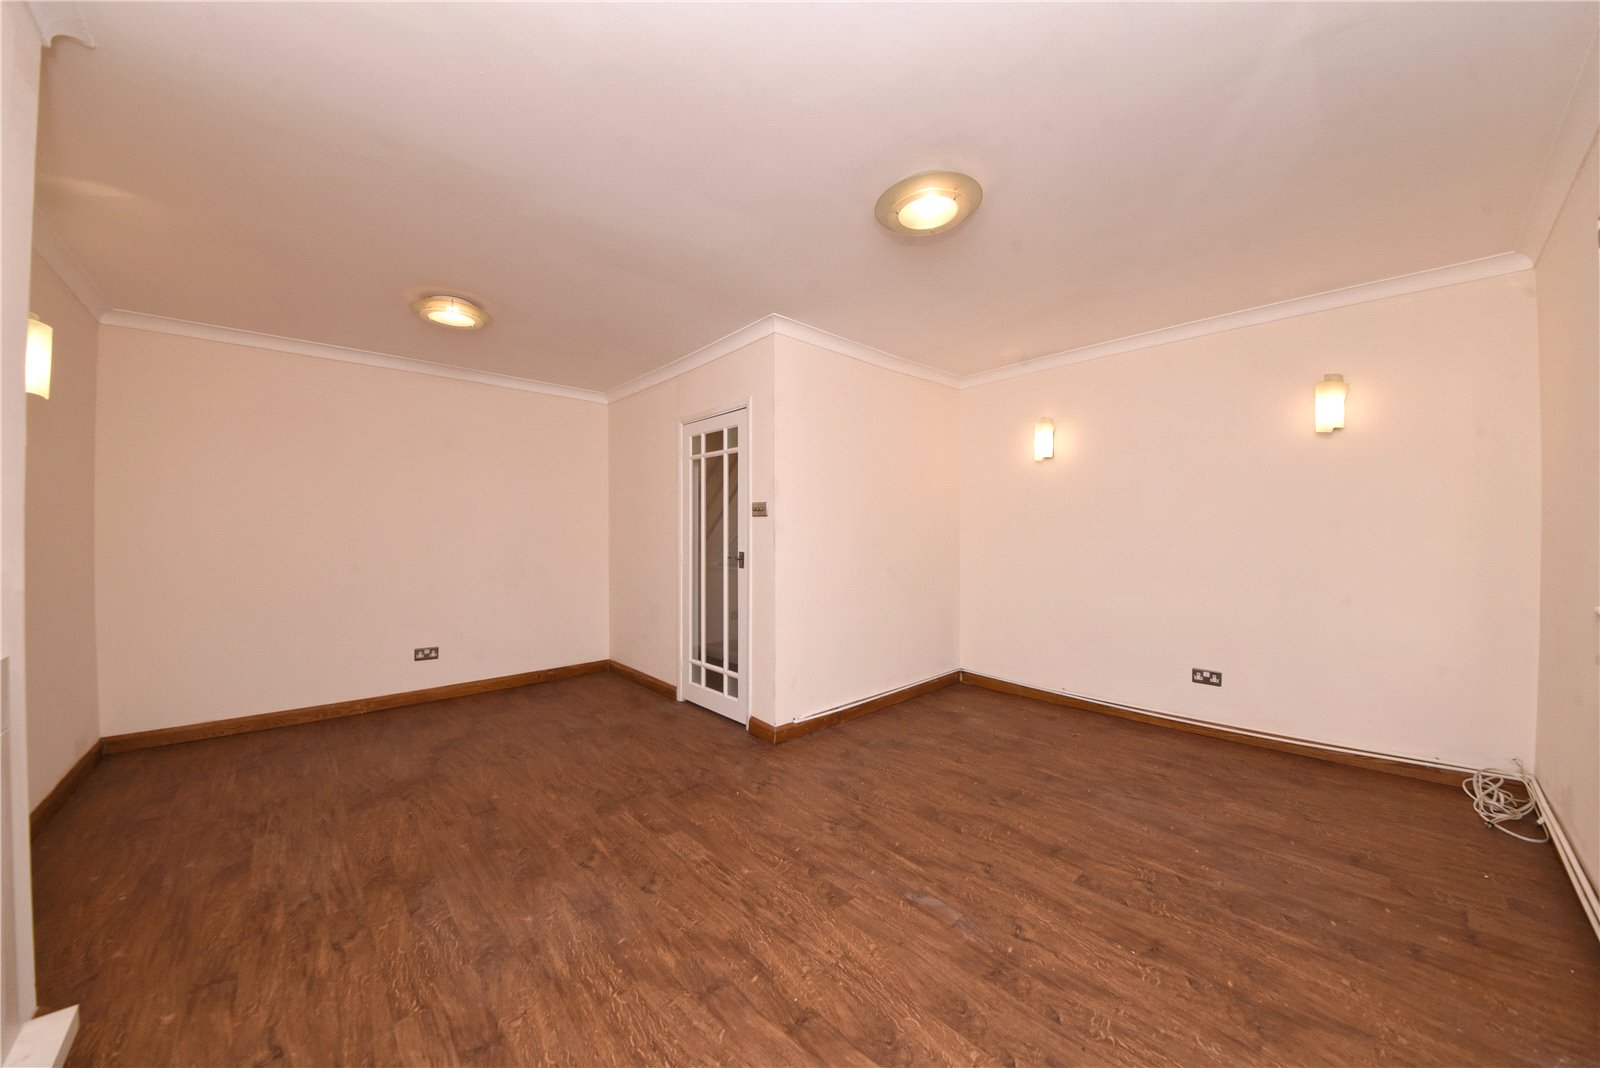 2 bed maisonette to rent in High Street, Bushey  - Property Image 11